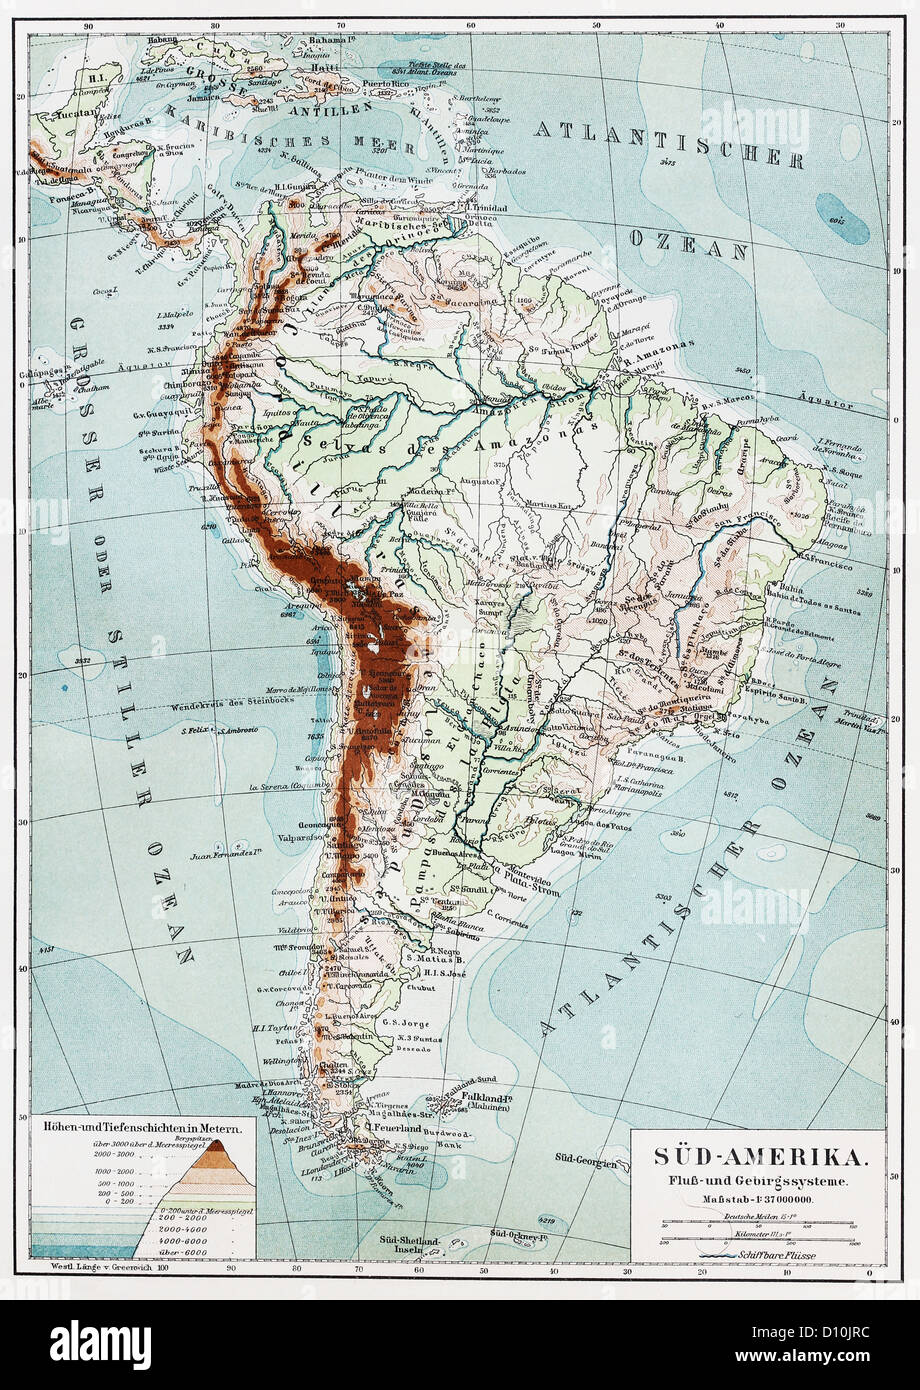 Vintage map of South America, rivers and mountains system from the end of 19th century Stock Photo